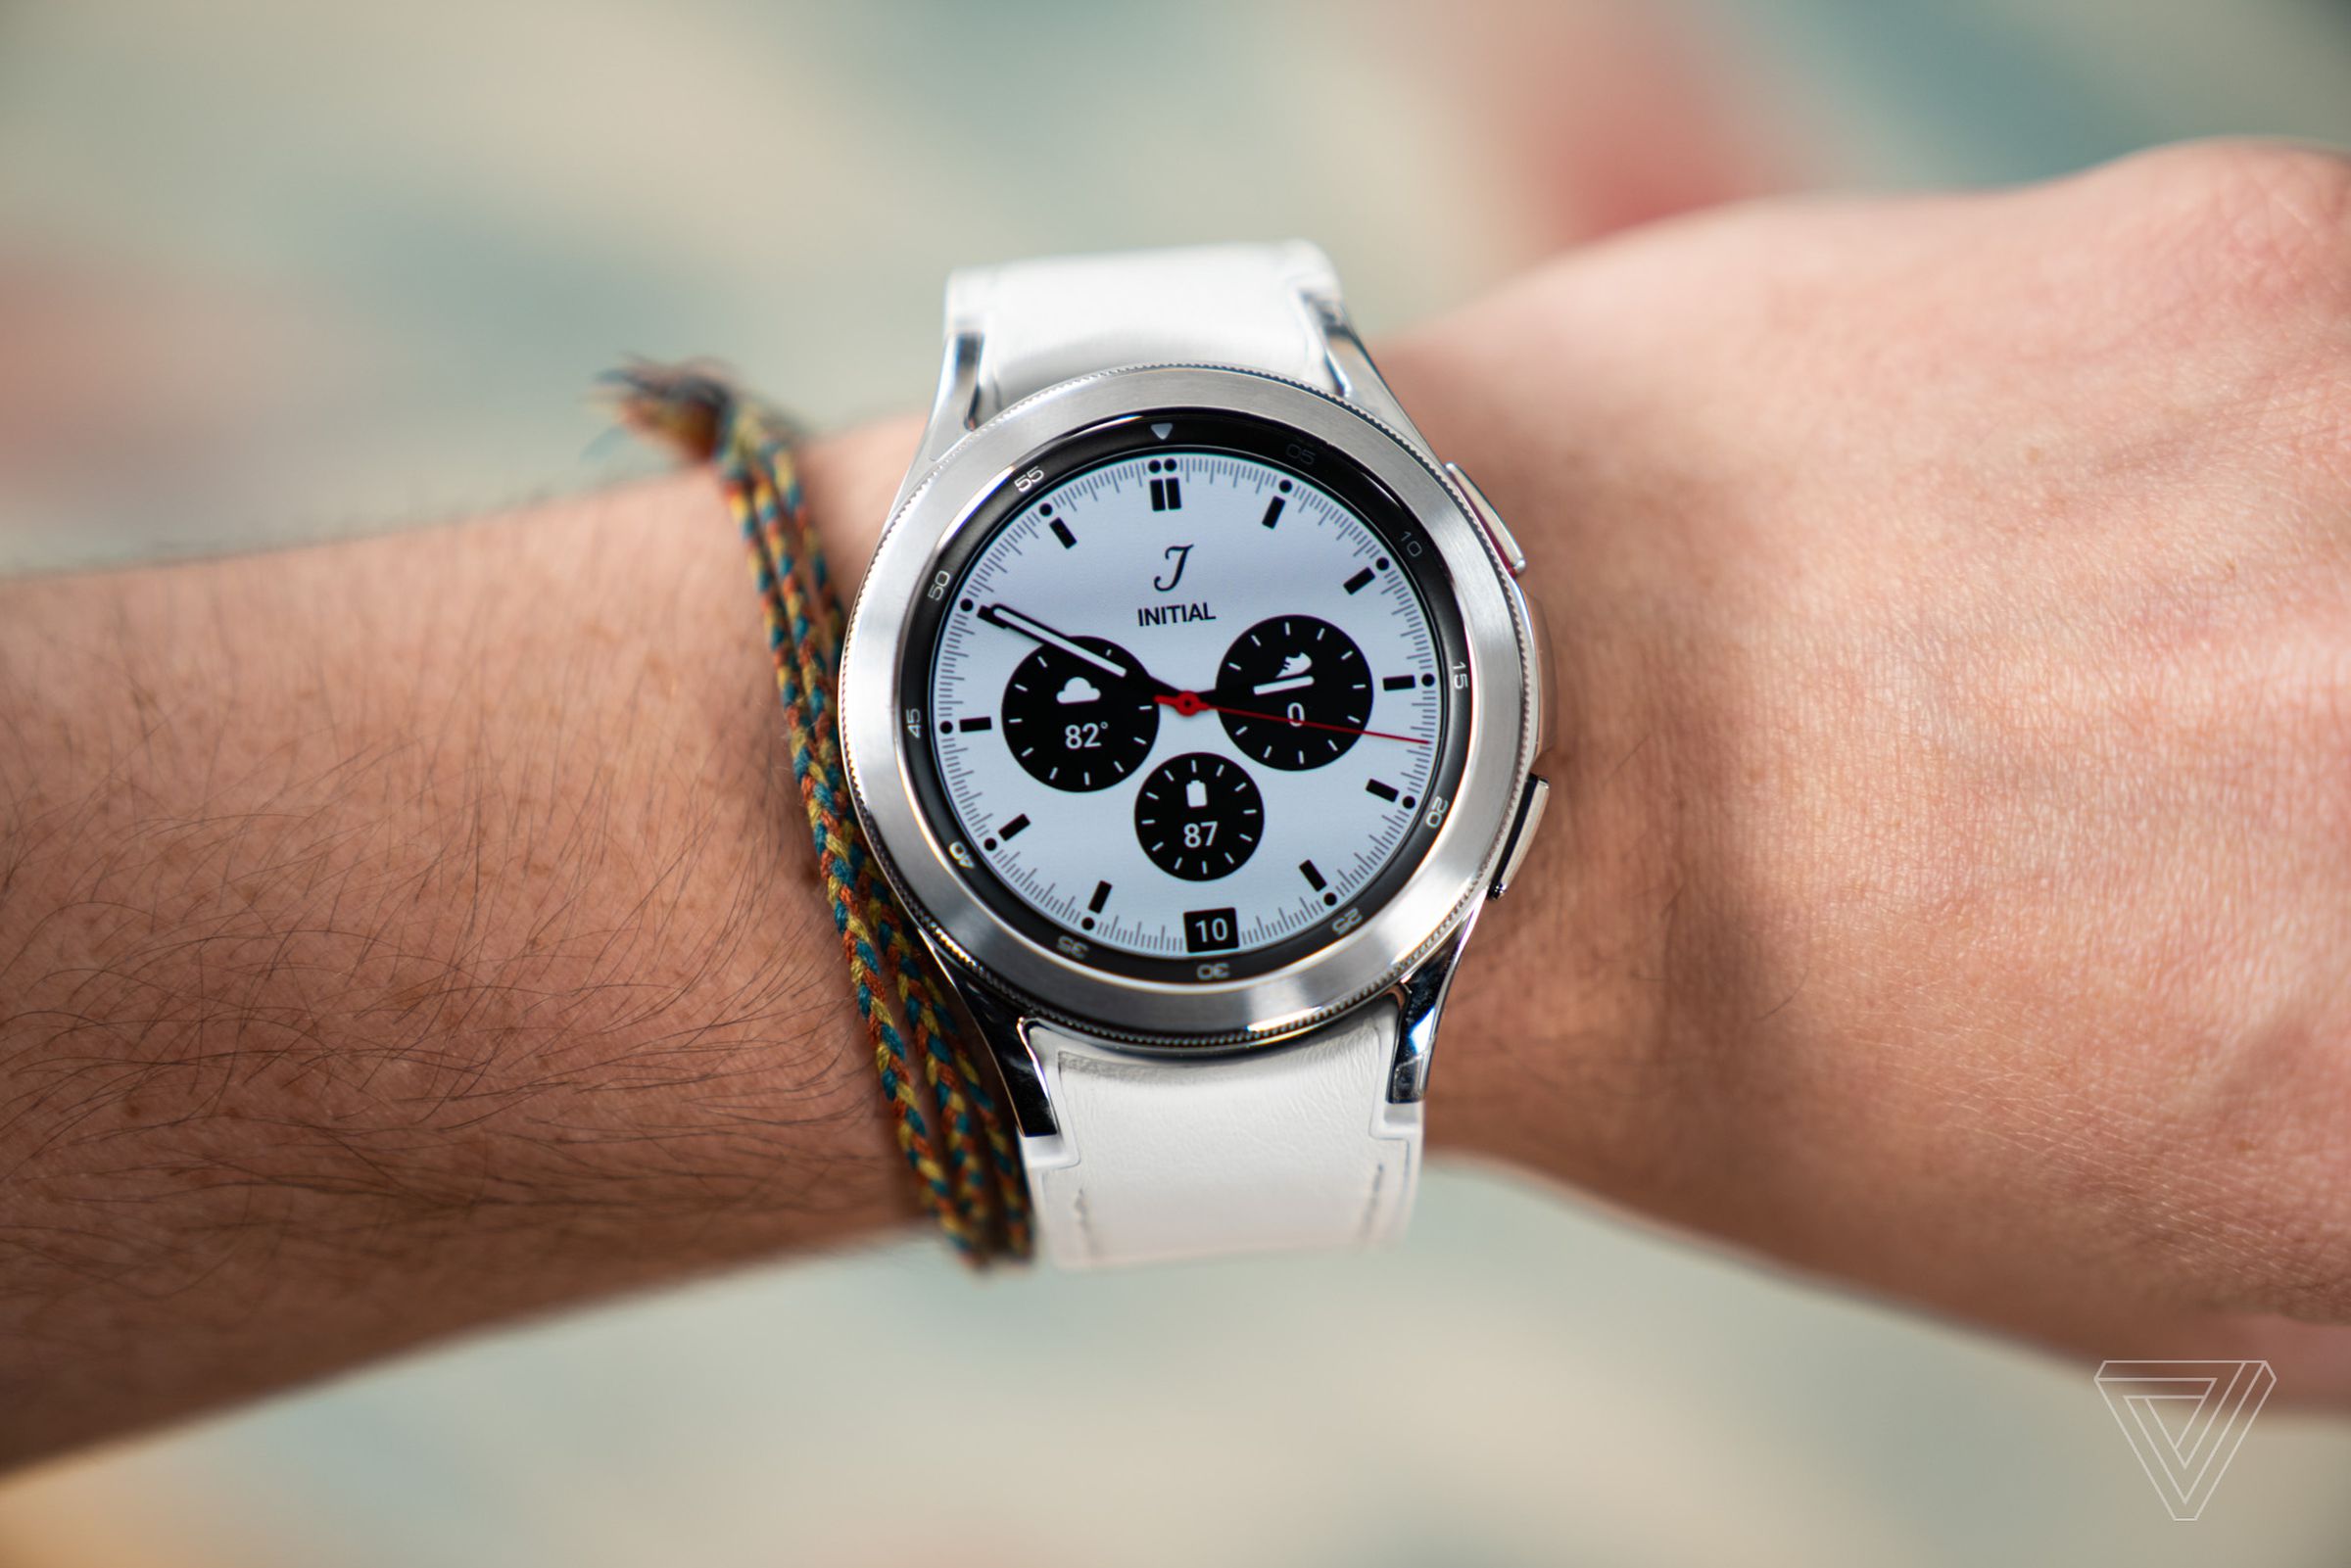 The Watch 4 Classic, with its physical rotating bezel.